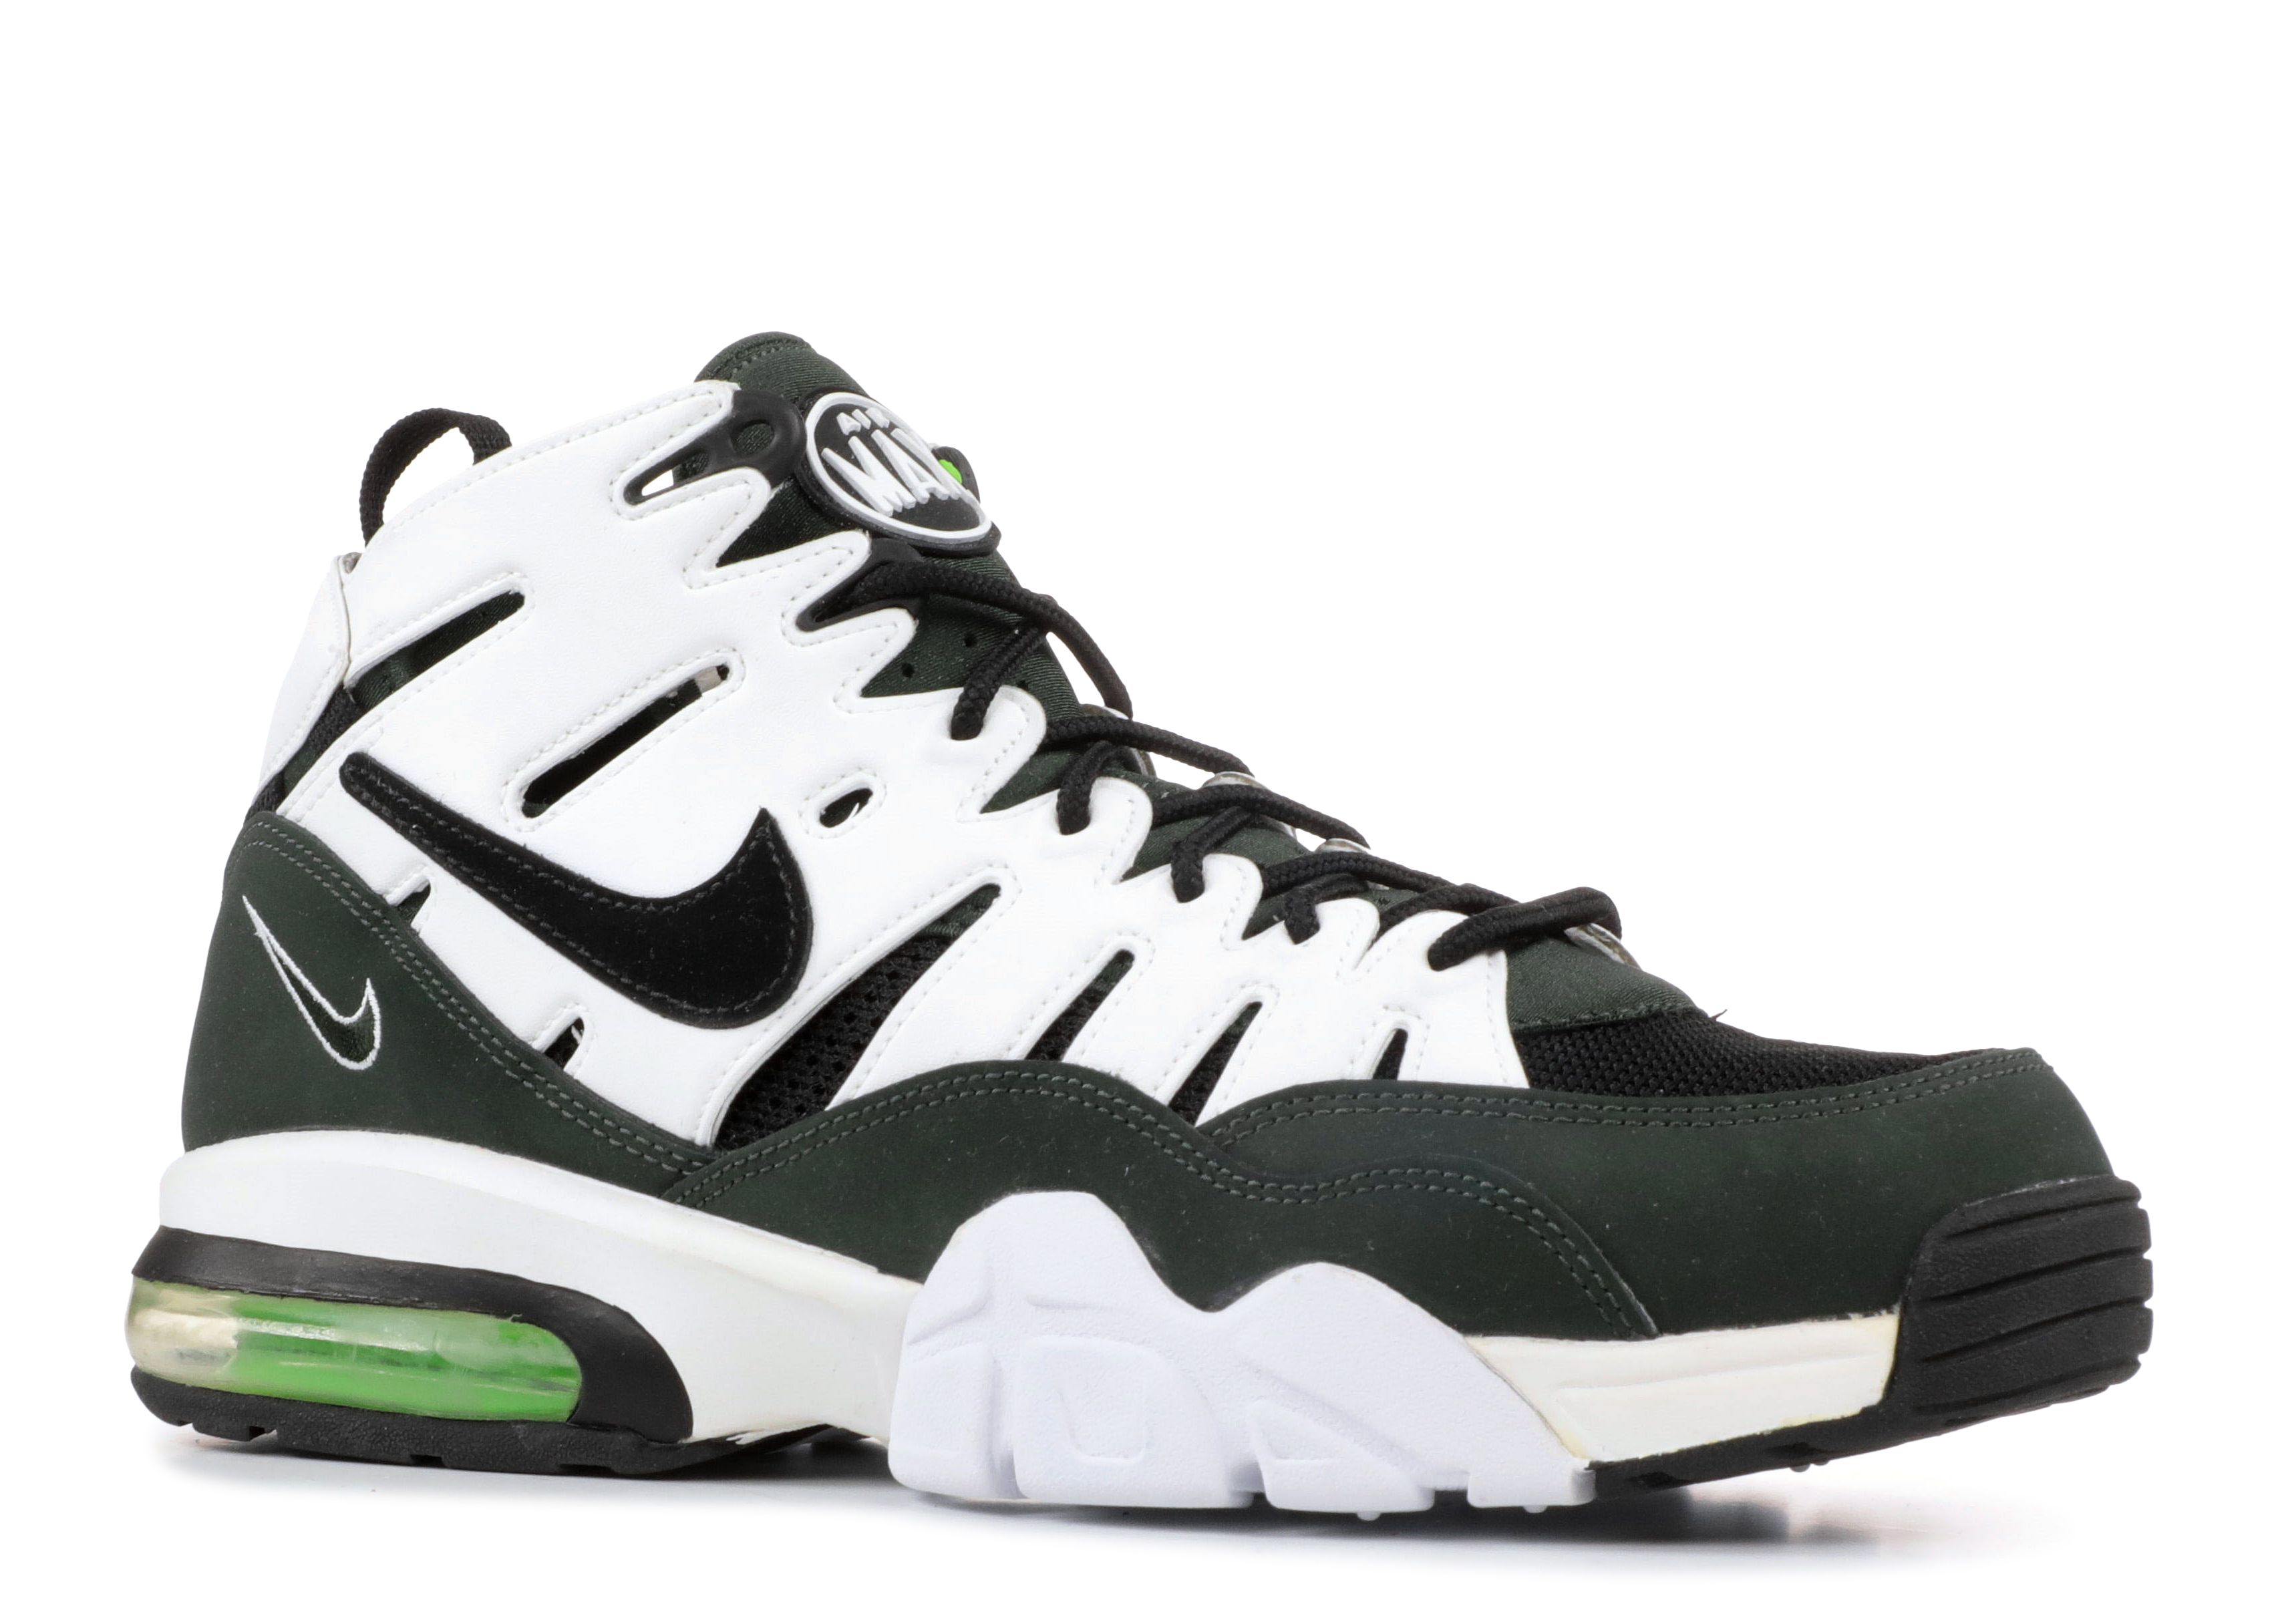 Buy > air max 94 trainer > in stock